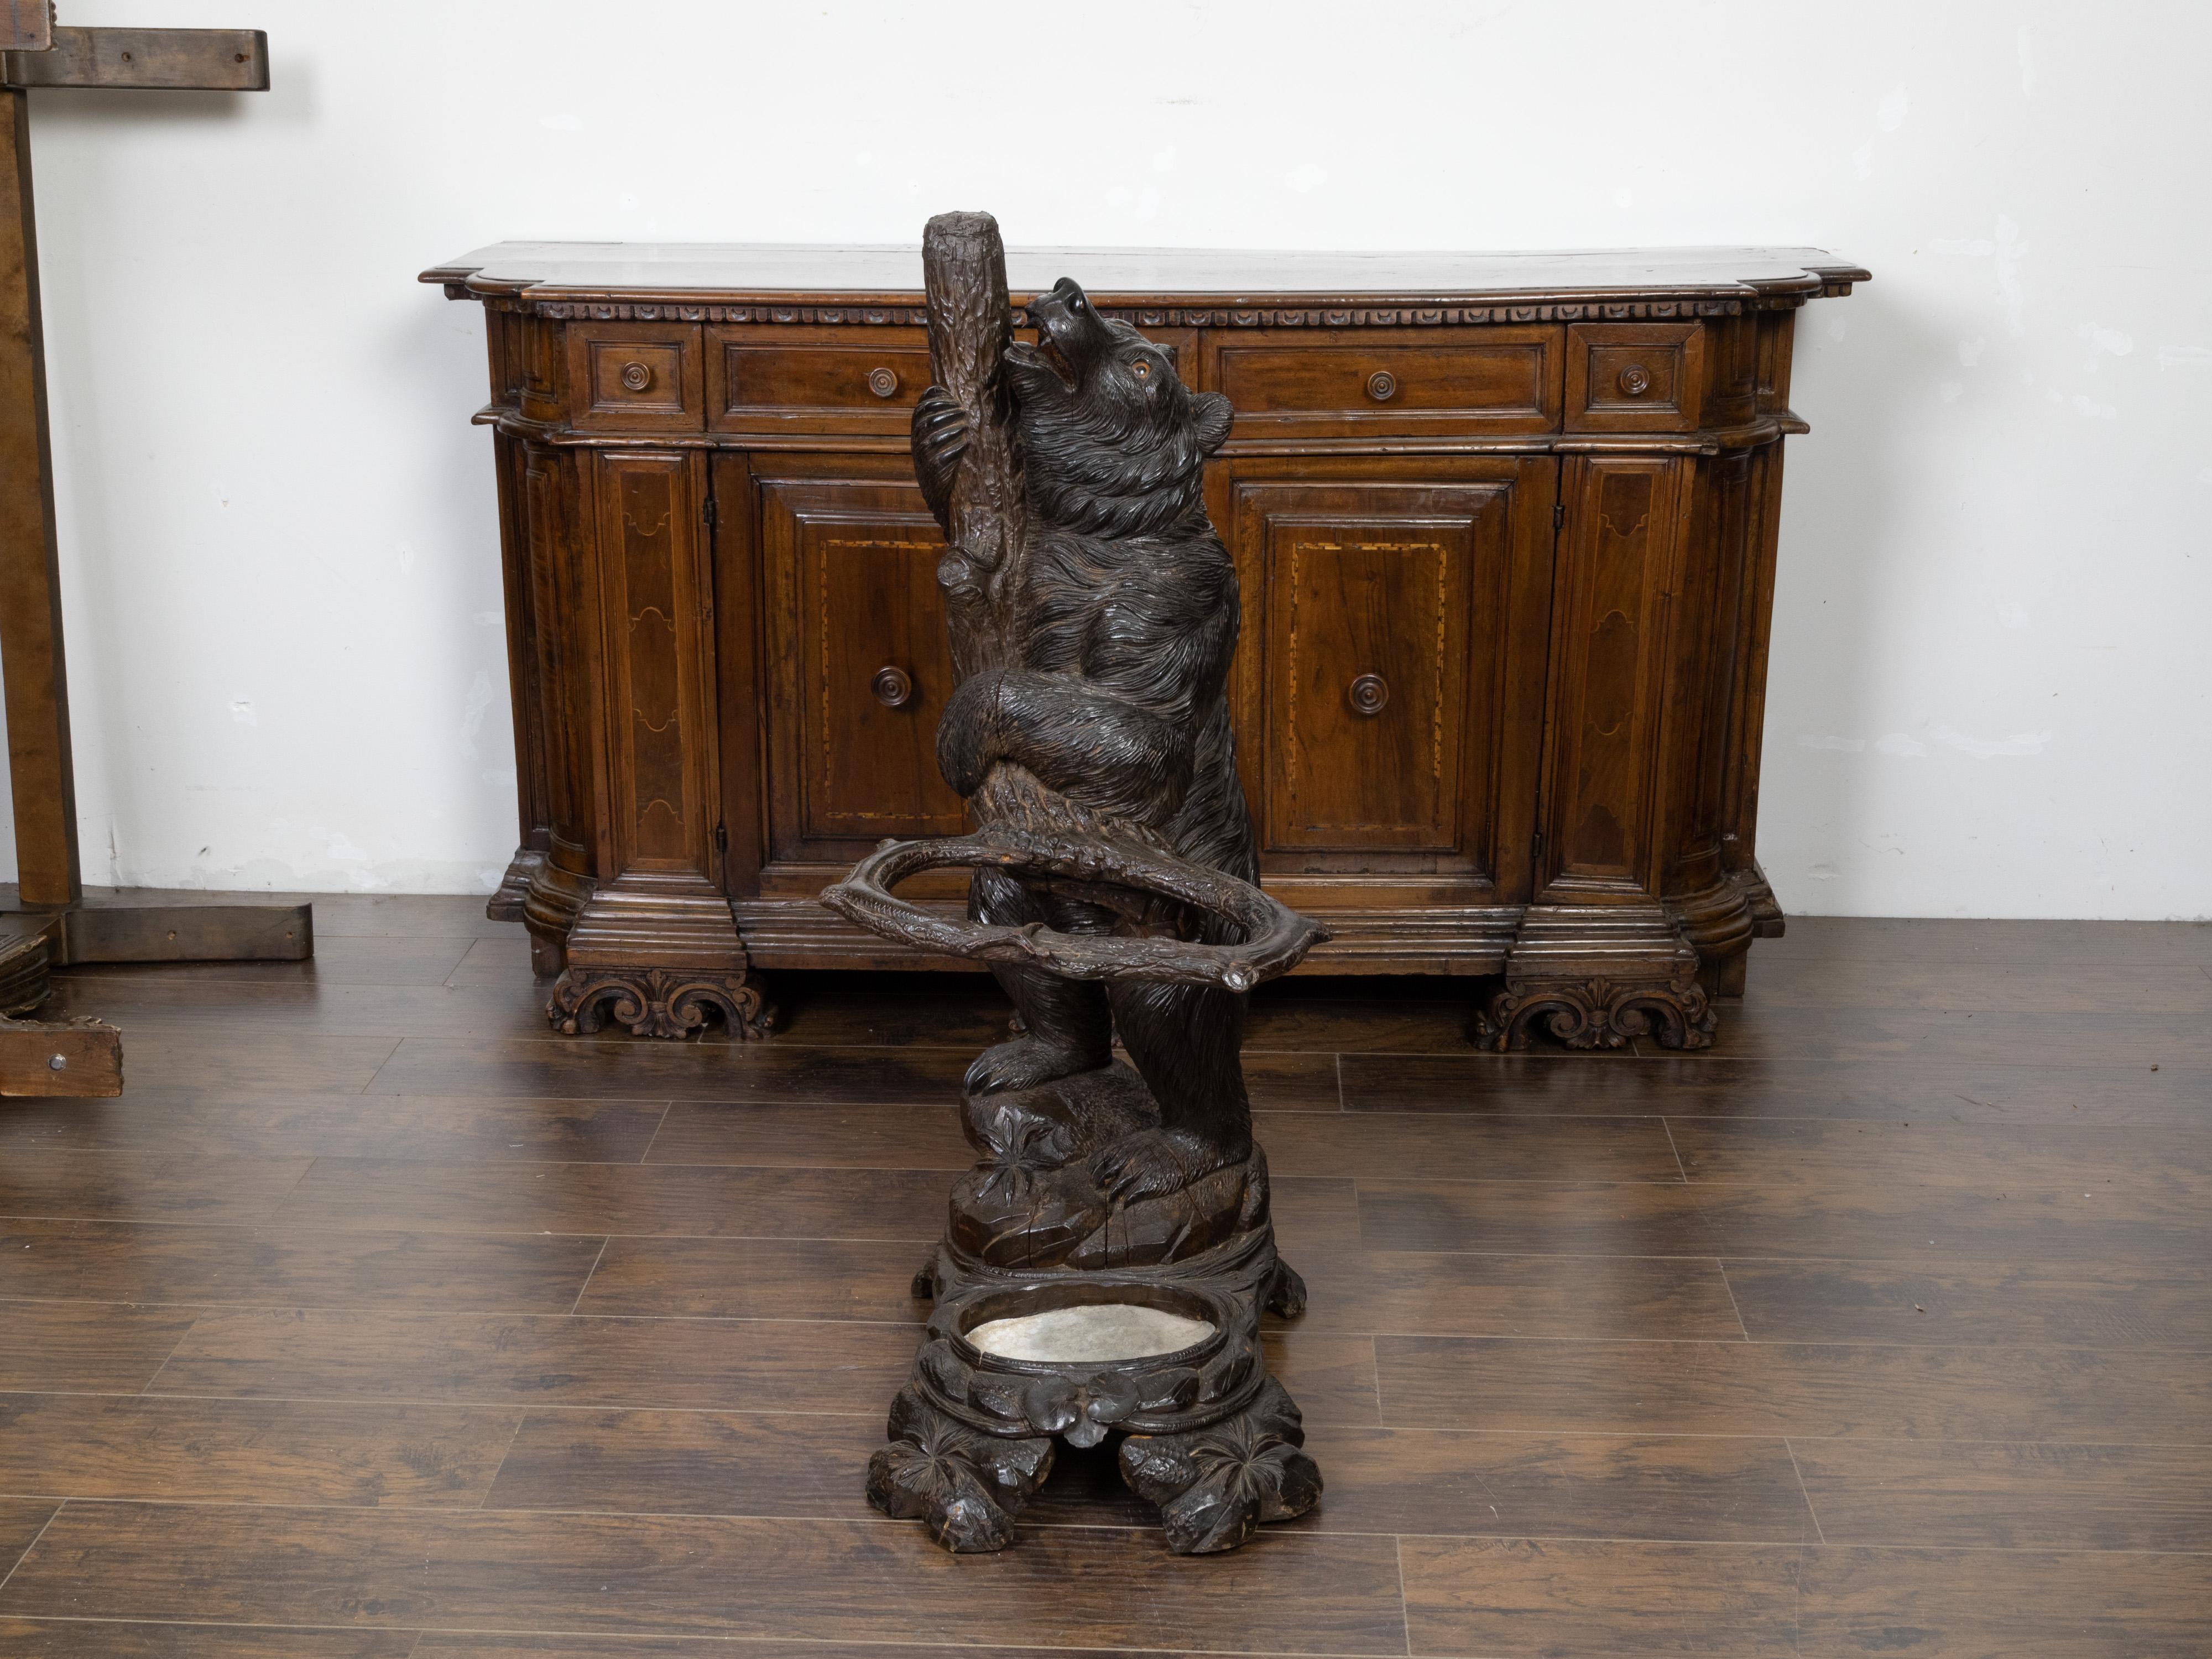 A large Black Forest carved wooden umbrella stand from the late 19th century, depicting a bear climbing a tree branch. Created during the last decade of the 19th century, this Black Forest umbrella stand features a large bear, firmly planted on his